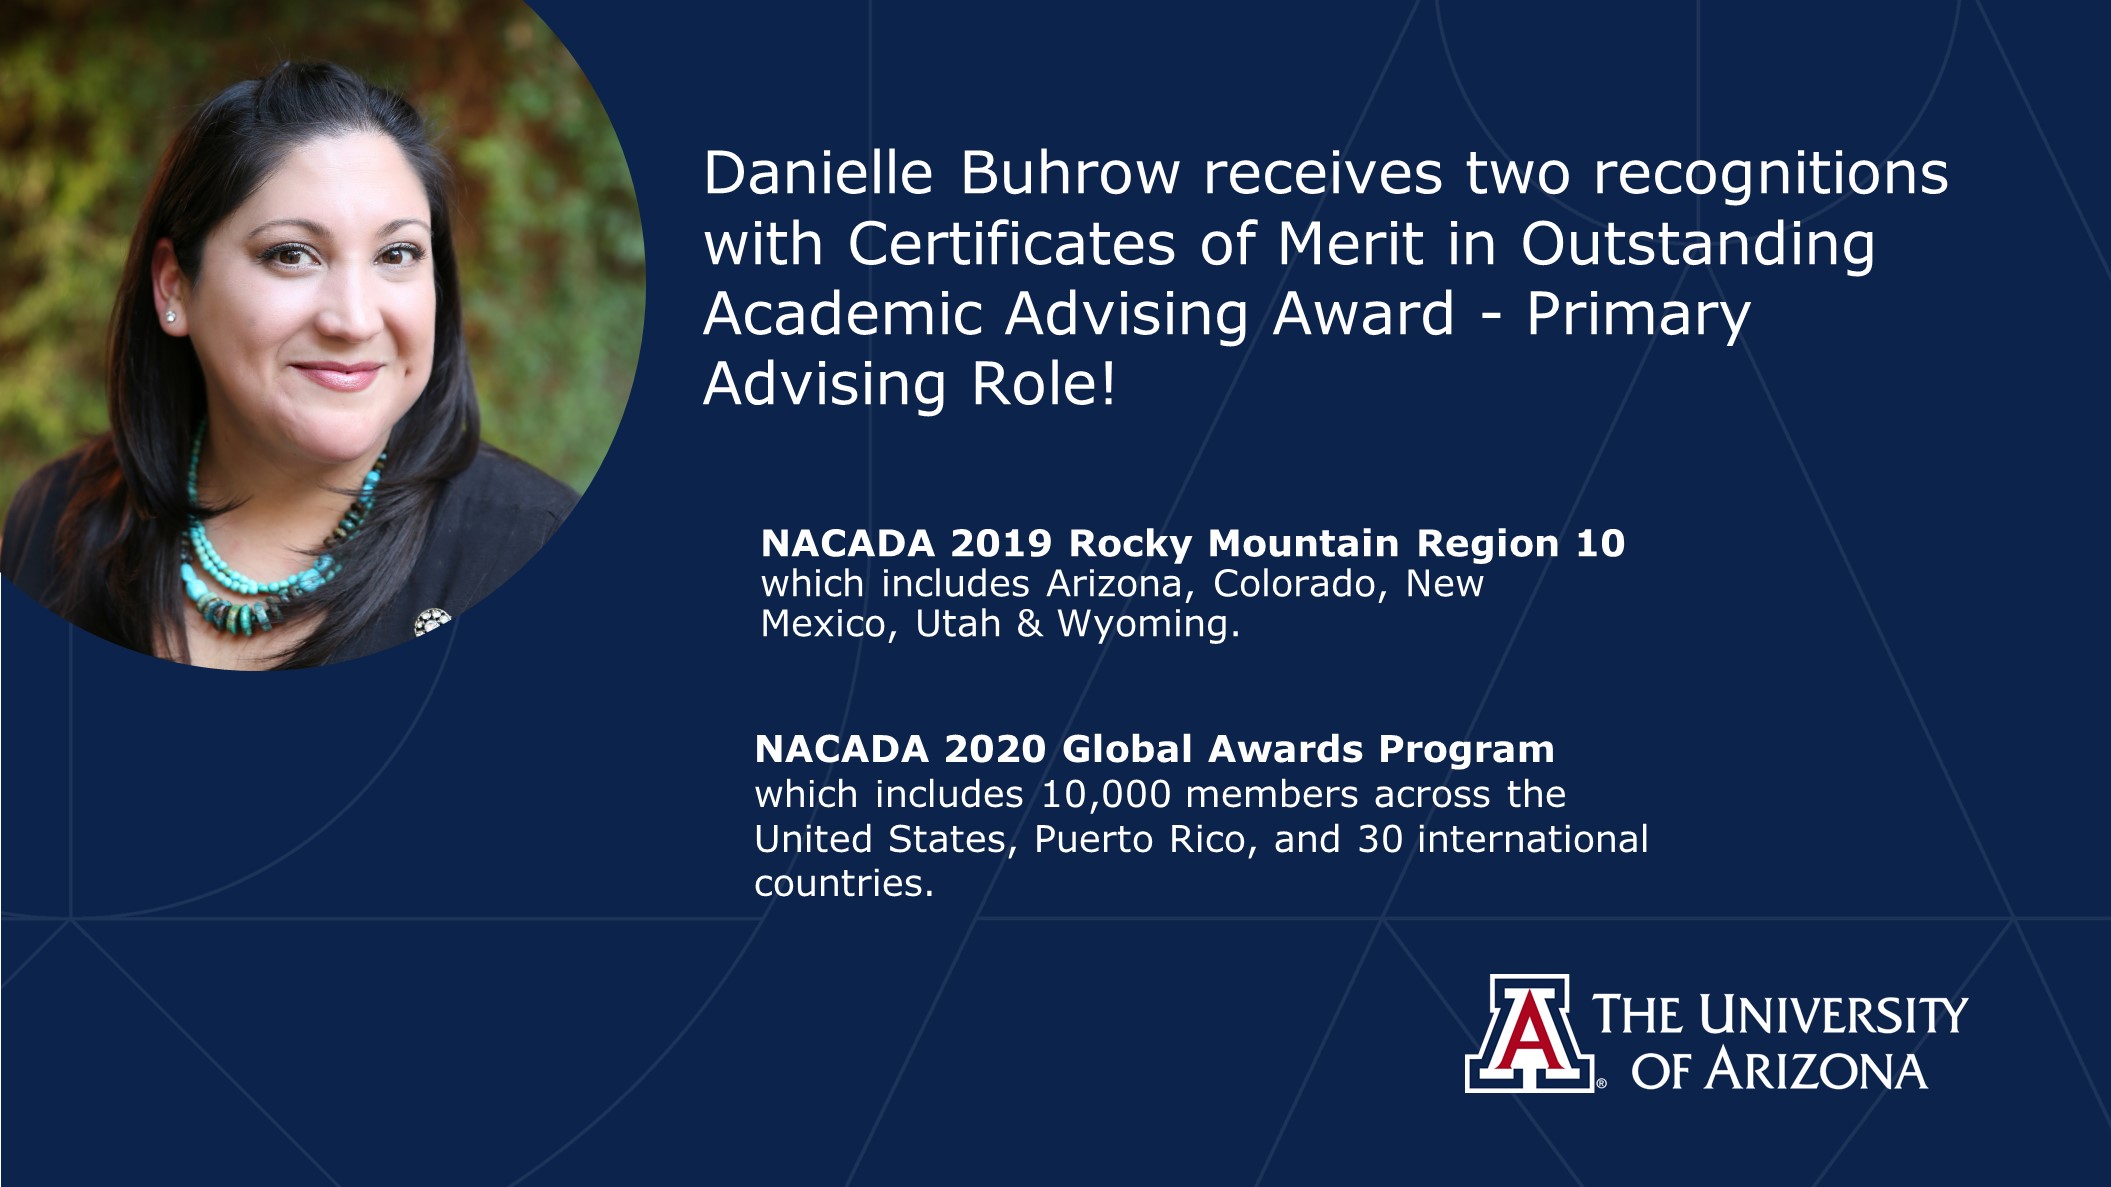 Danielle Buhrow NACADA regional and global awards recognition 2019-2020